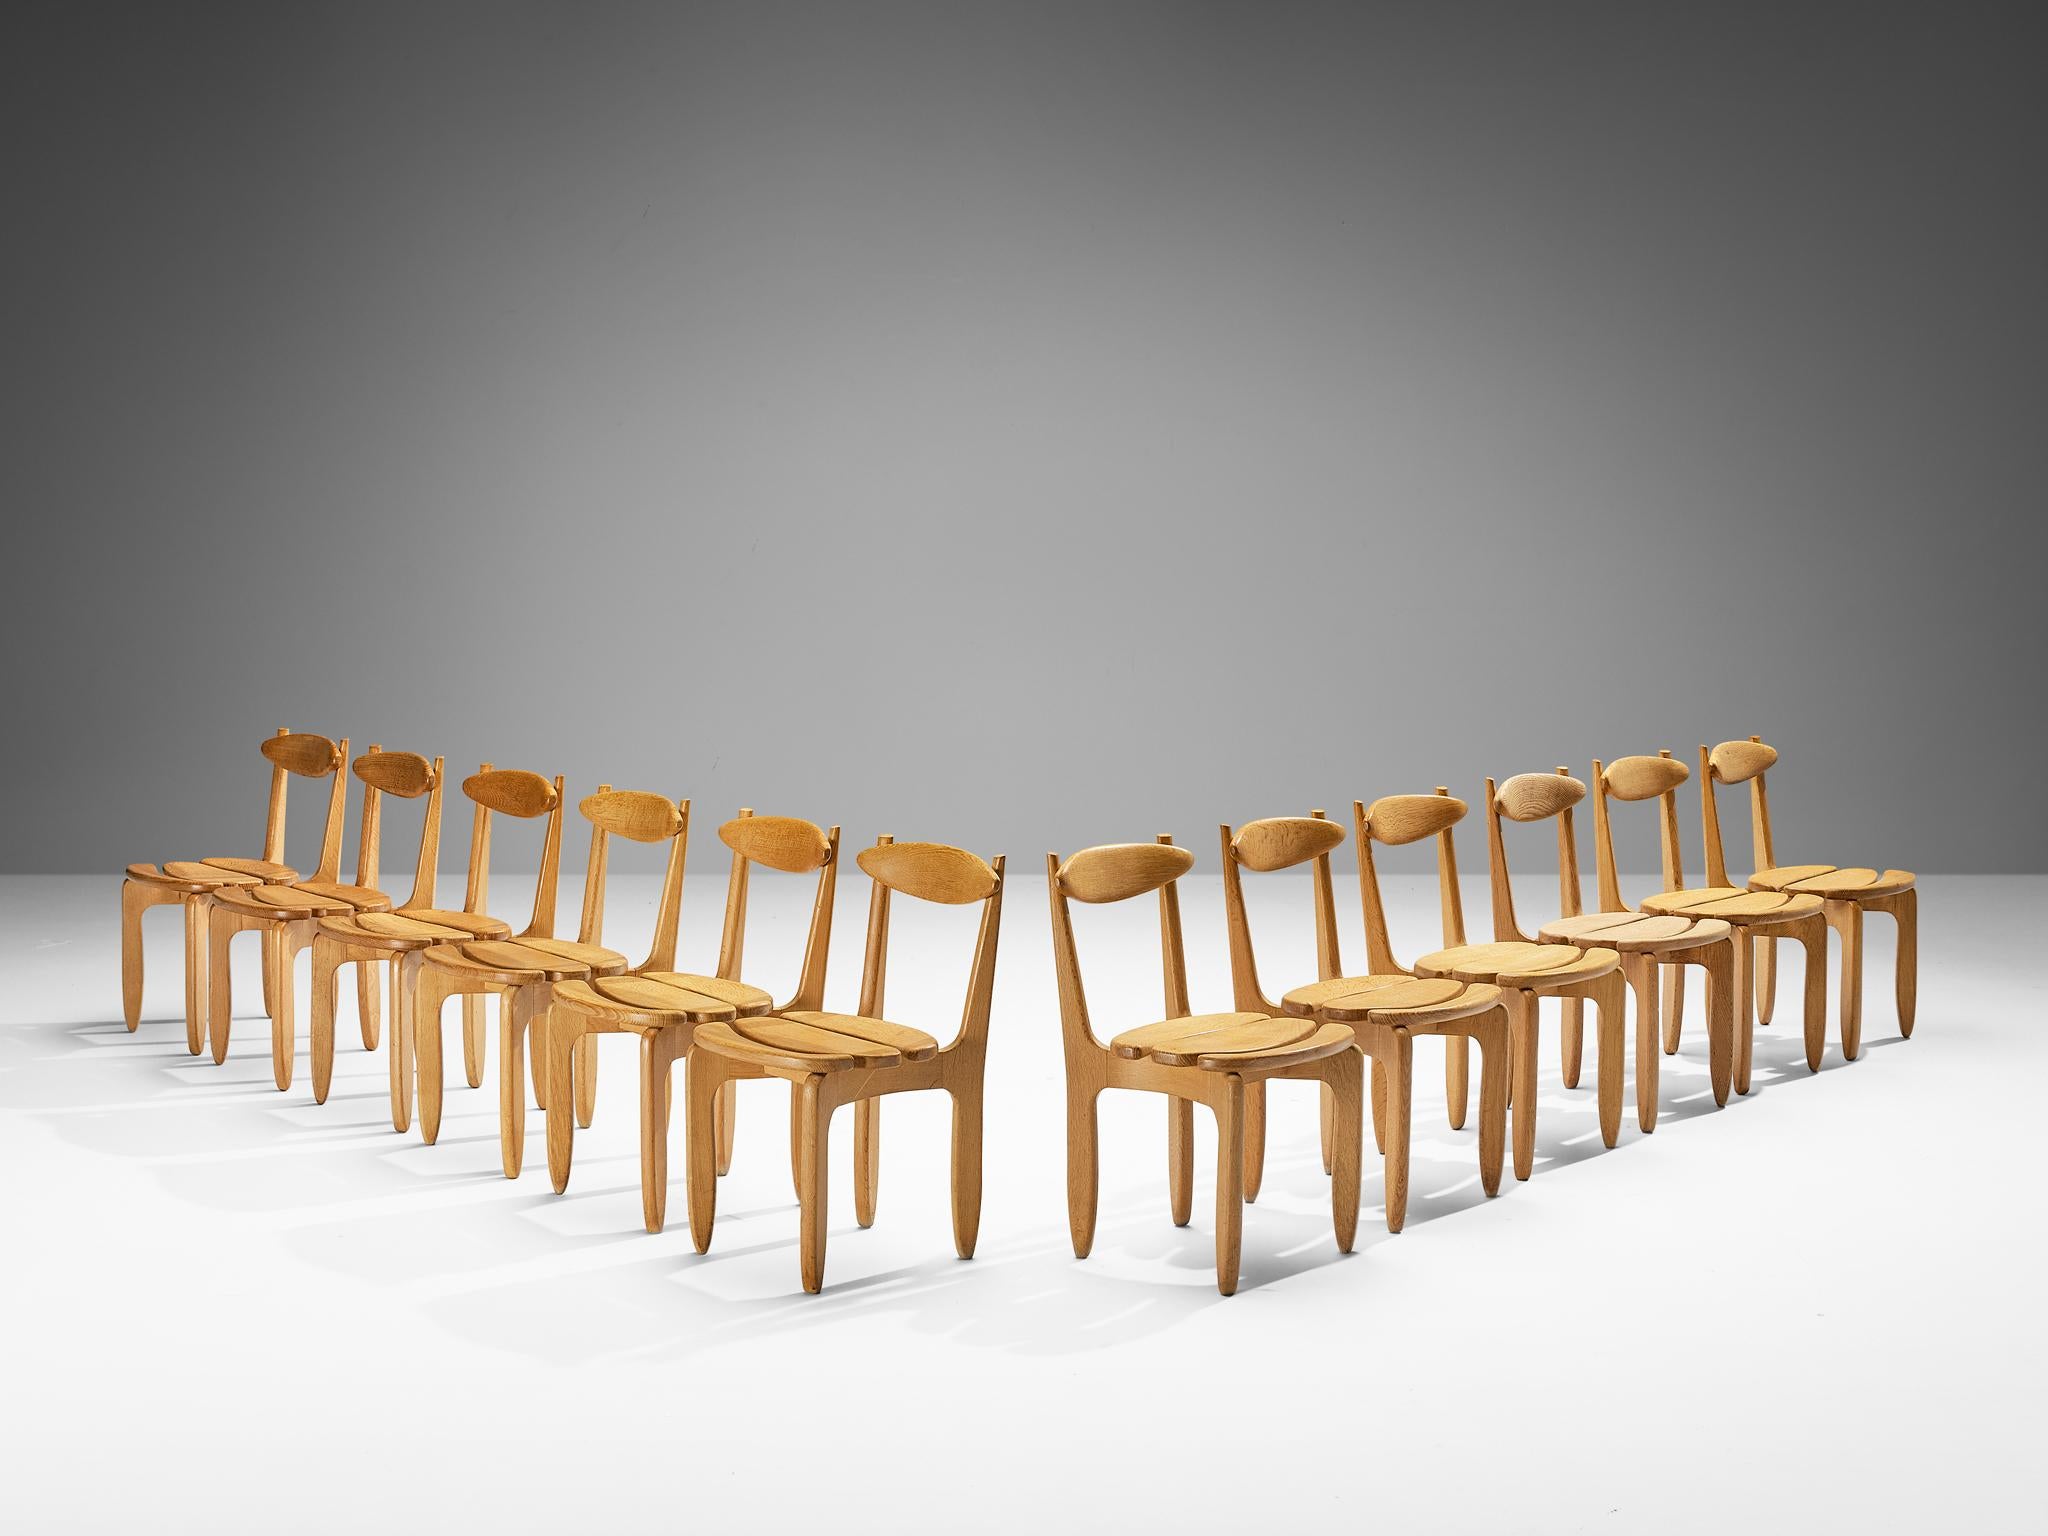 Guillerme et Chambron for Votre Maison, set of twelve dining chairs, oak, France, 1960s.

Set of twelve elegant and robust dining chairs in solid oak by Guillerme and Chambron. These chairs show the characteristic frame of this French designer duo,